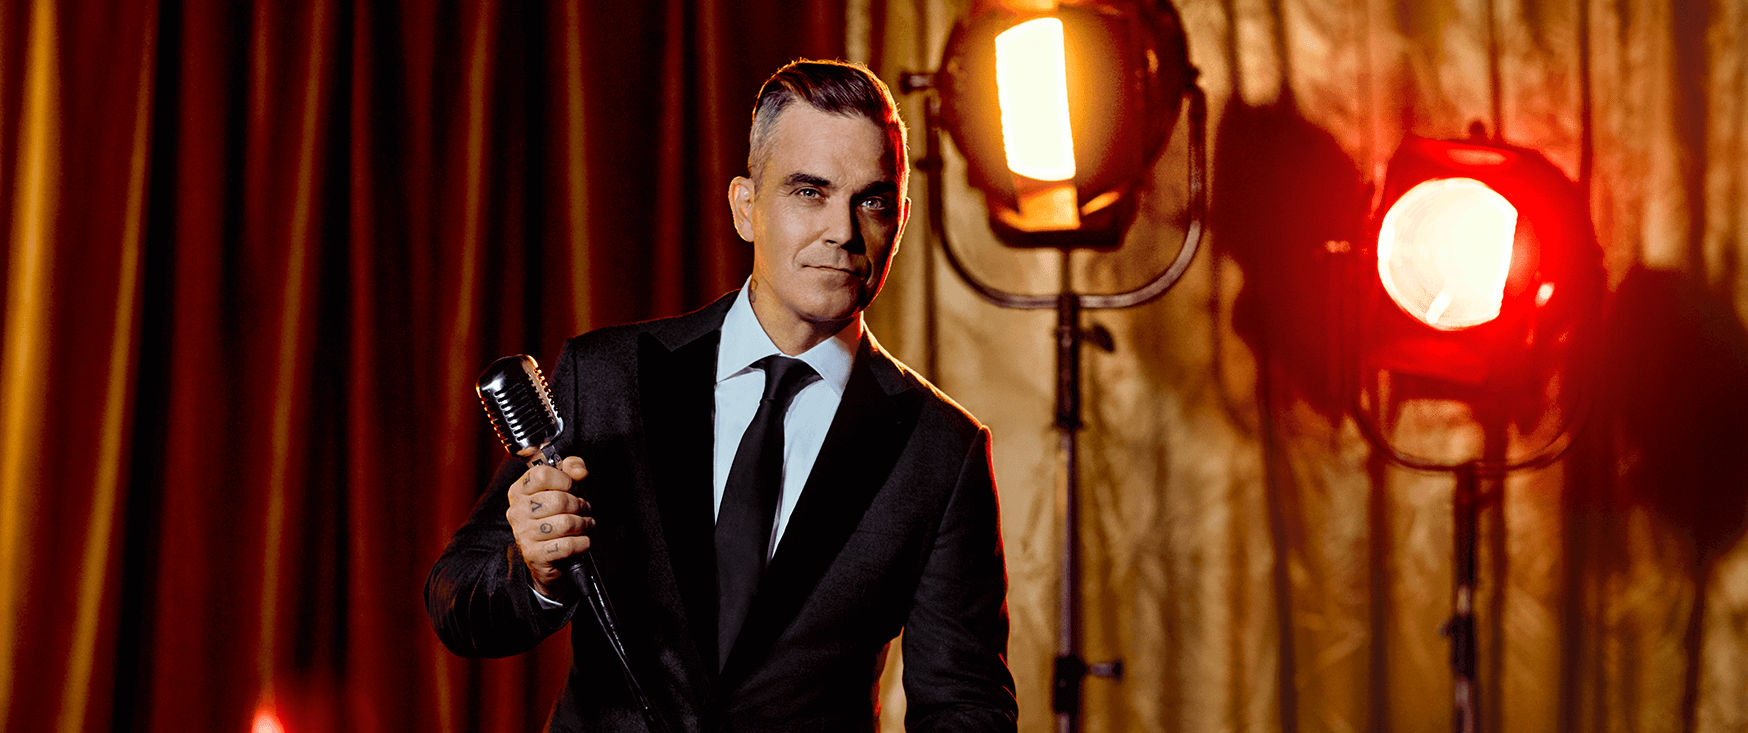 New Dates added to Robbie Williams Live in Las Vegas 2020